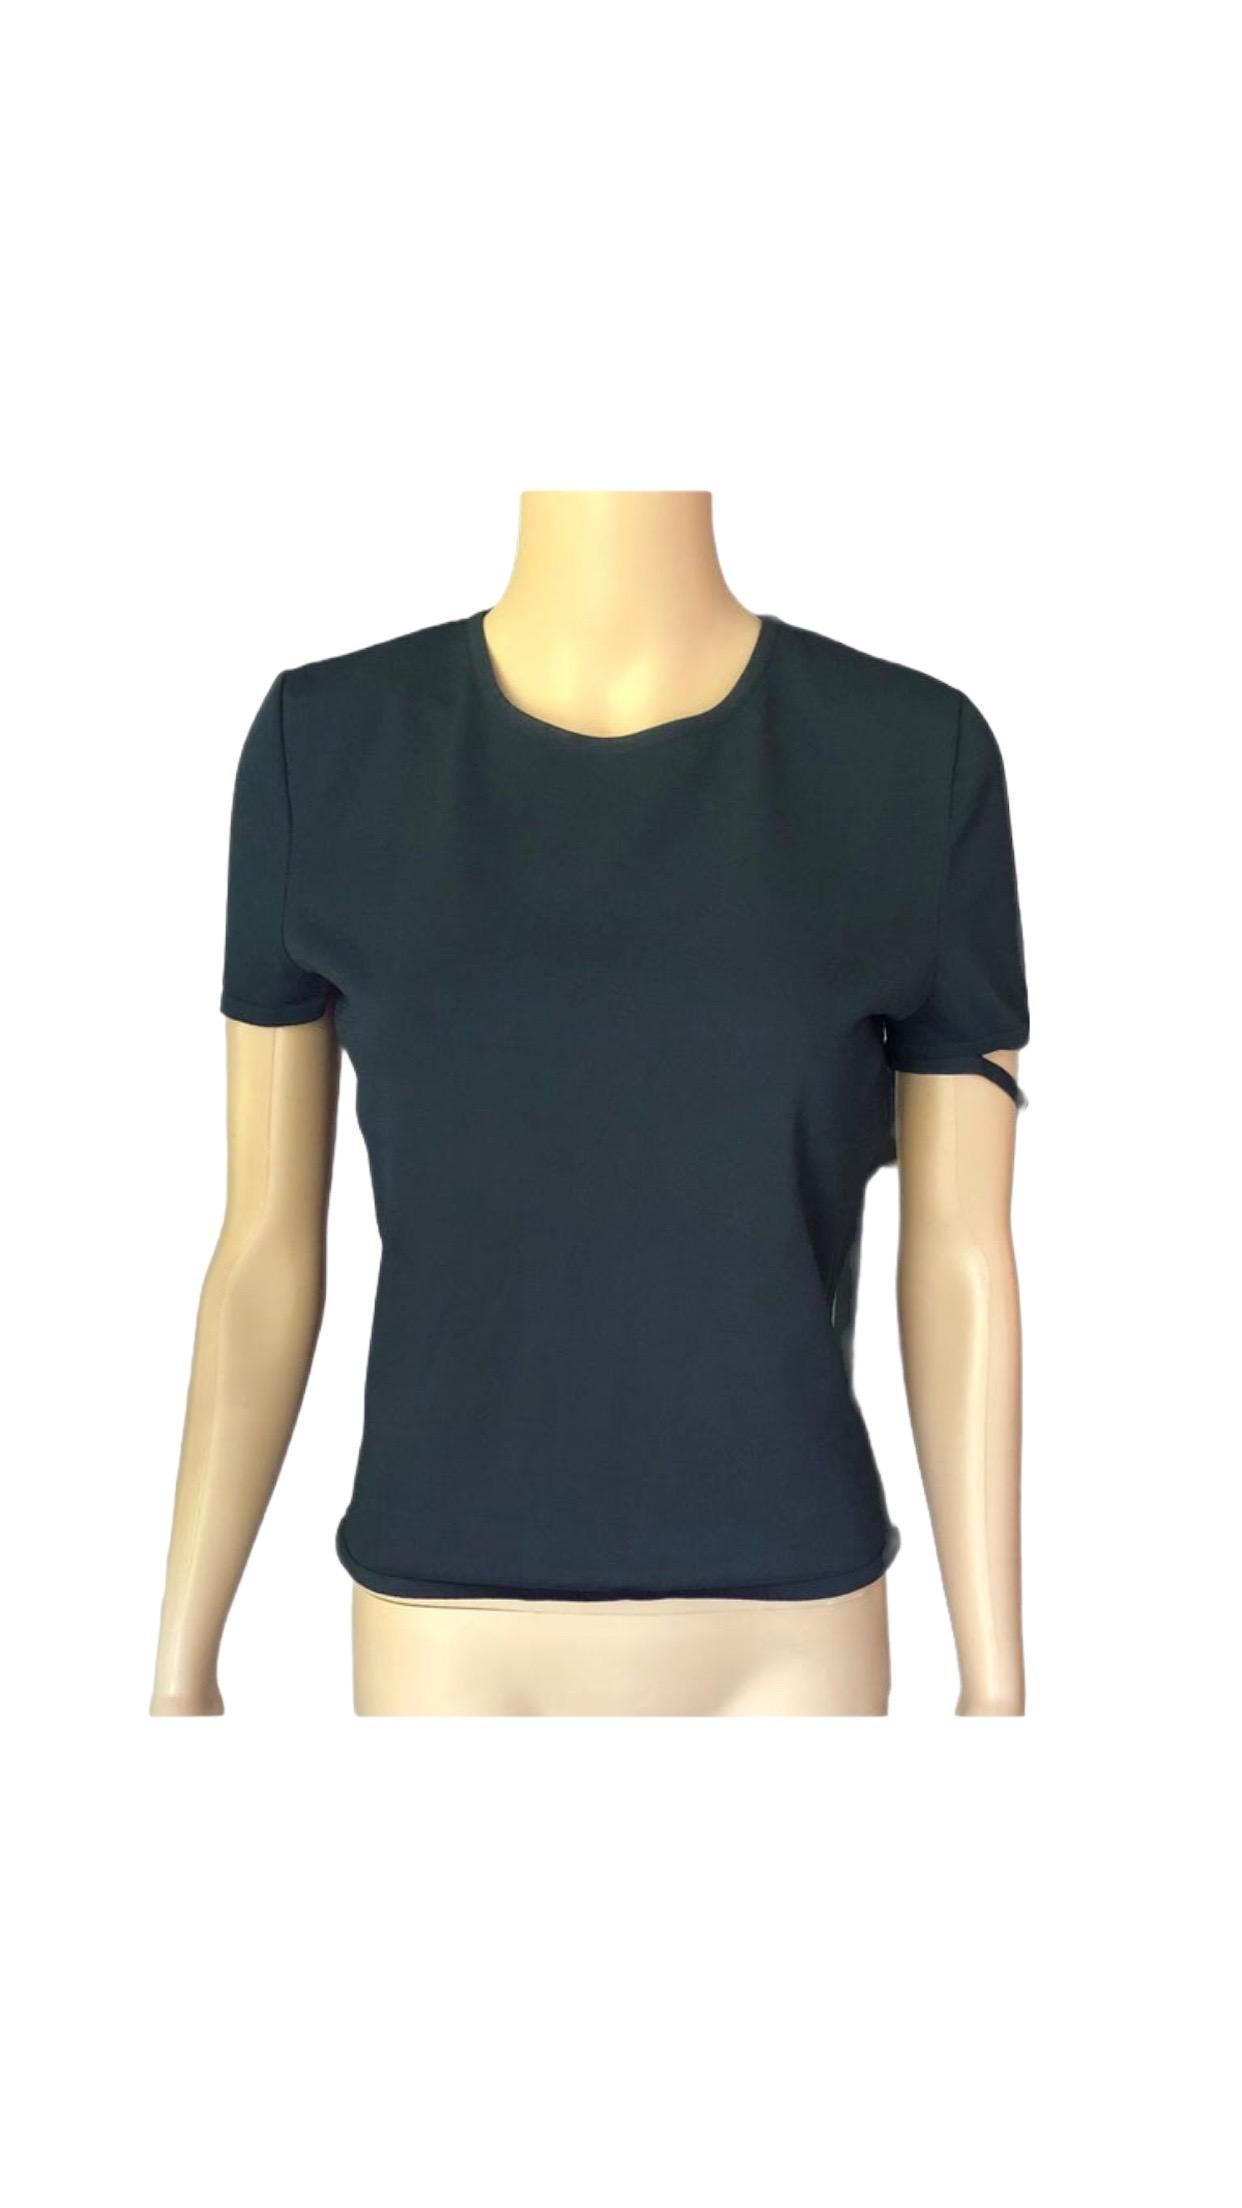 Tom Ford for Gucci S/S 1998 Vintage Cutout Knit Top For Sale 4